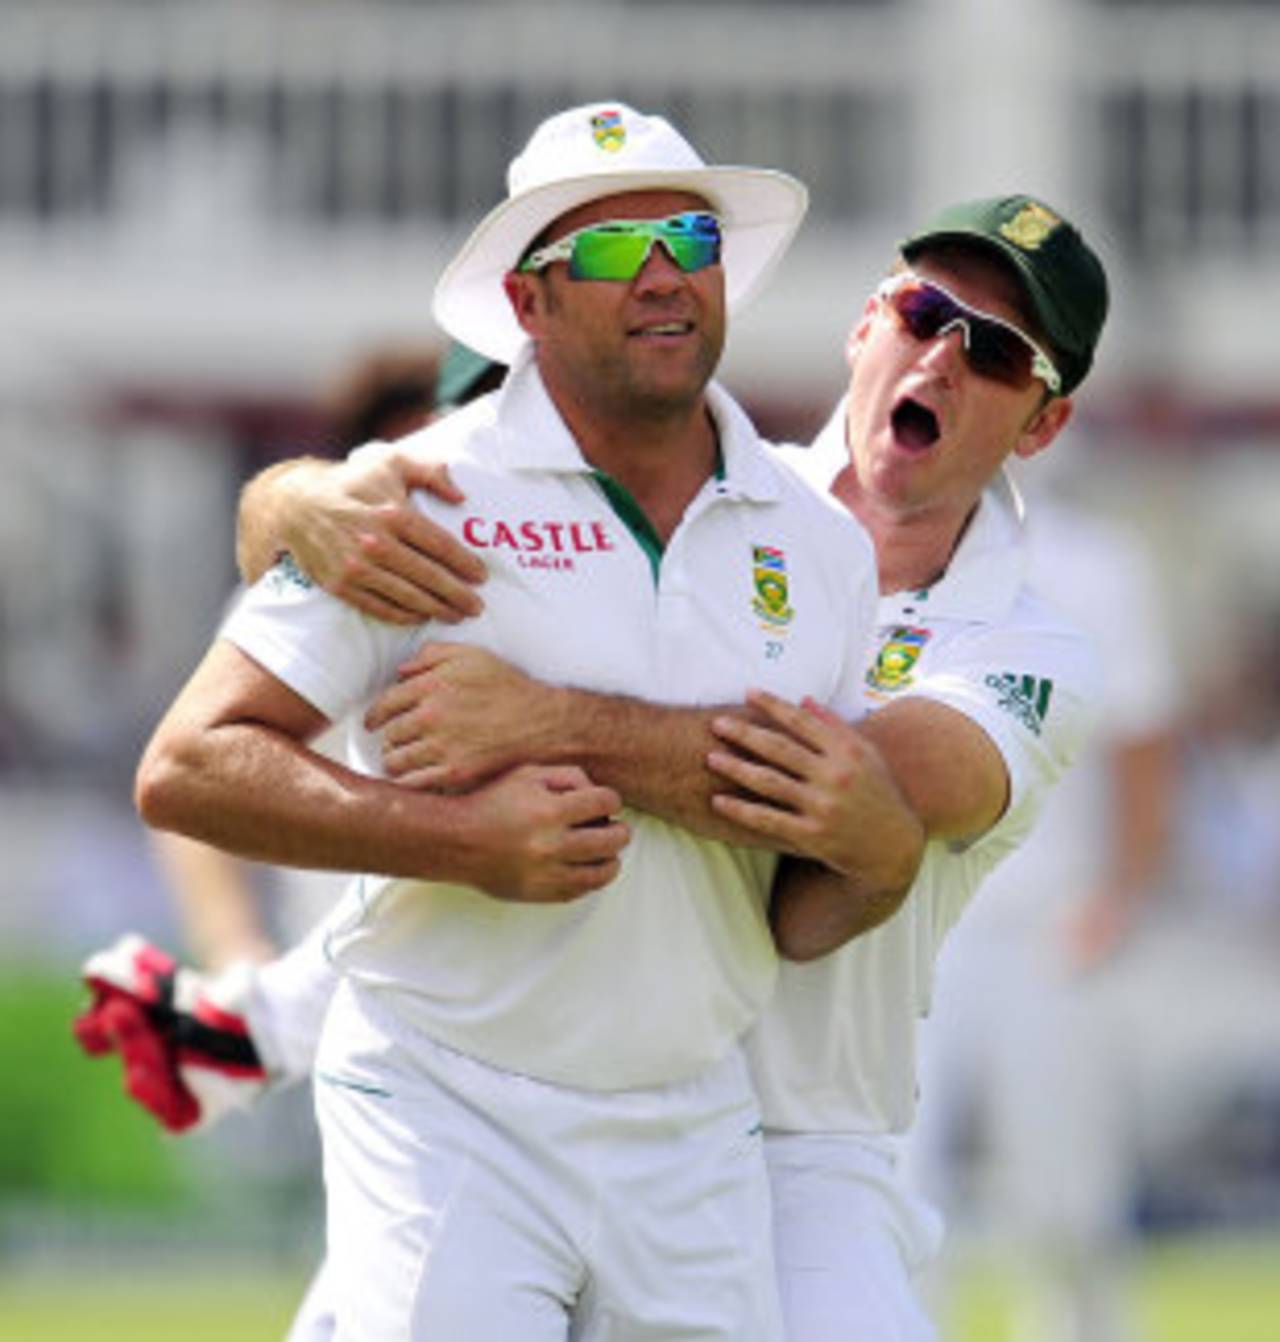 Graeme Smith embraces Jacques Kallis after his sharp catch, England v South Africa, 3rd Investec Test, Lord's, 2nd day, August 17, 2012